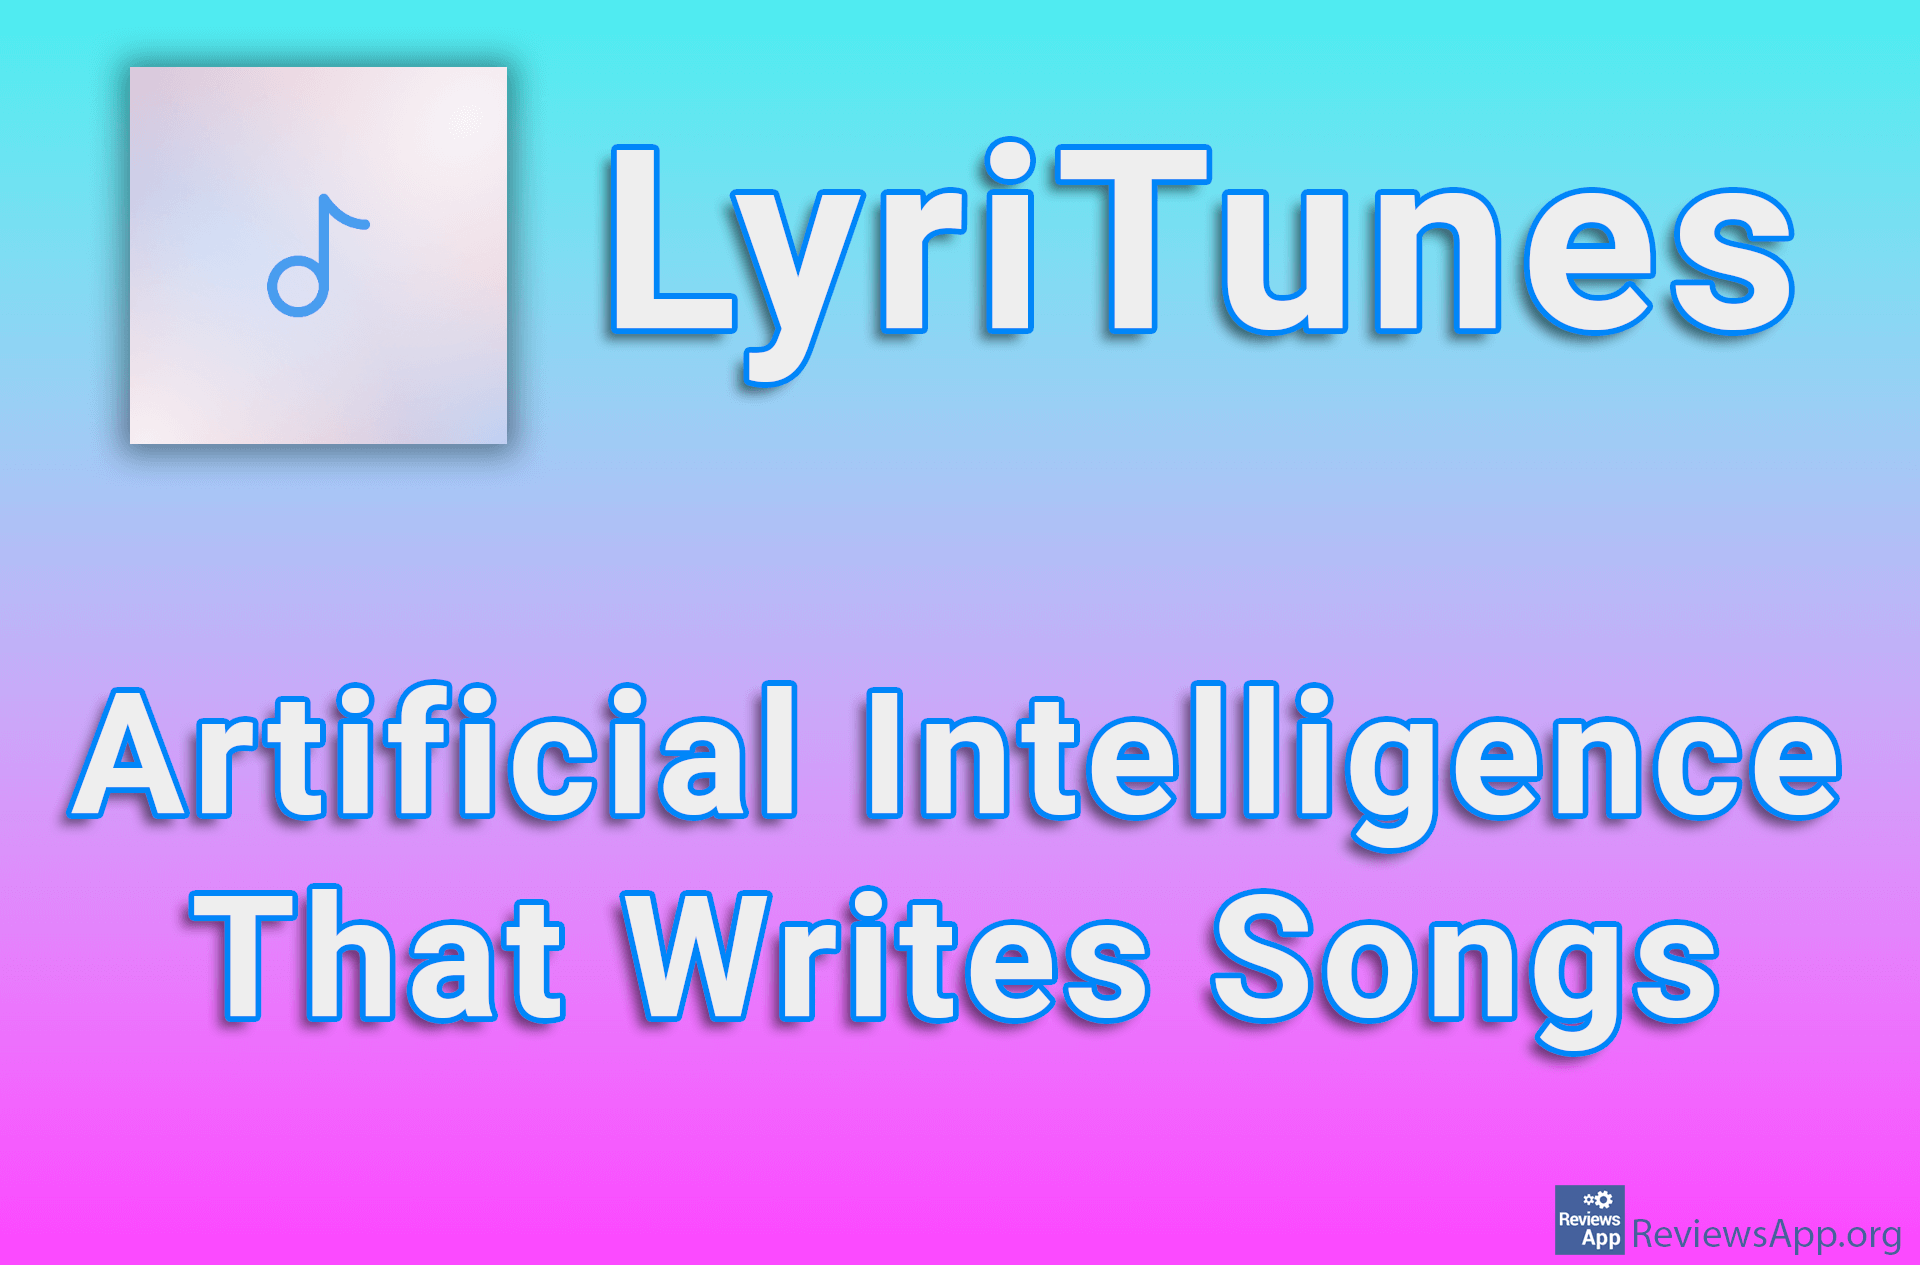 LyriTunes – Artificial Intelligence That Writes Songs